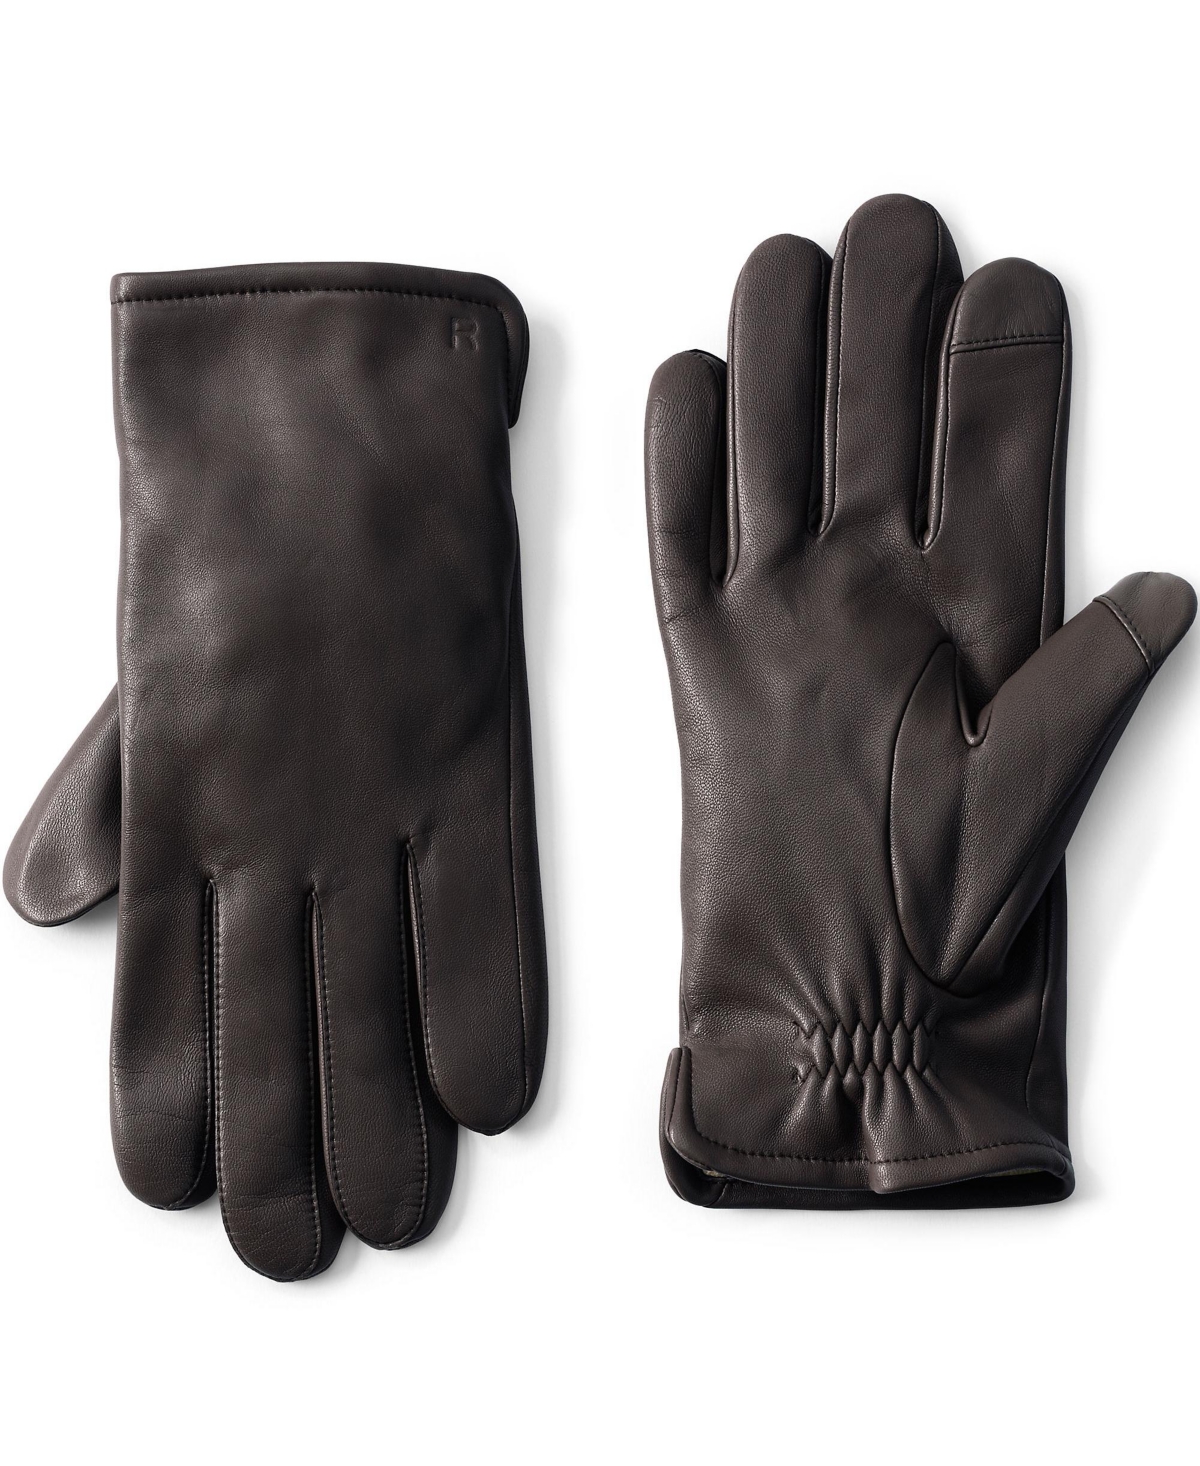 Men's Cashmere Lined Ez Touch Leather Glove - British tan